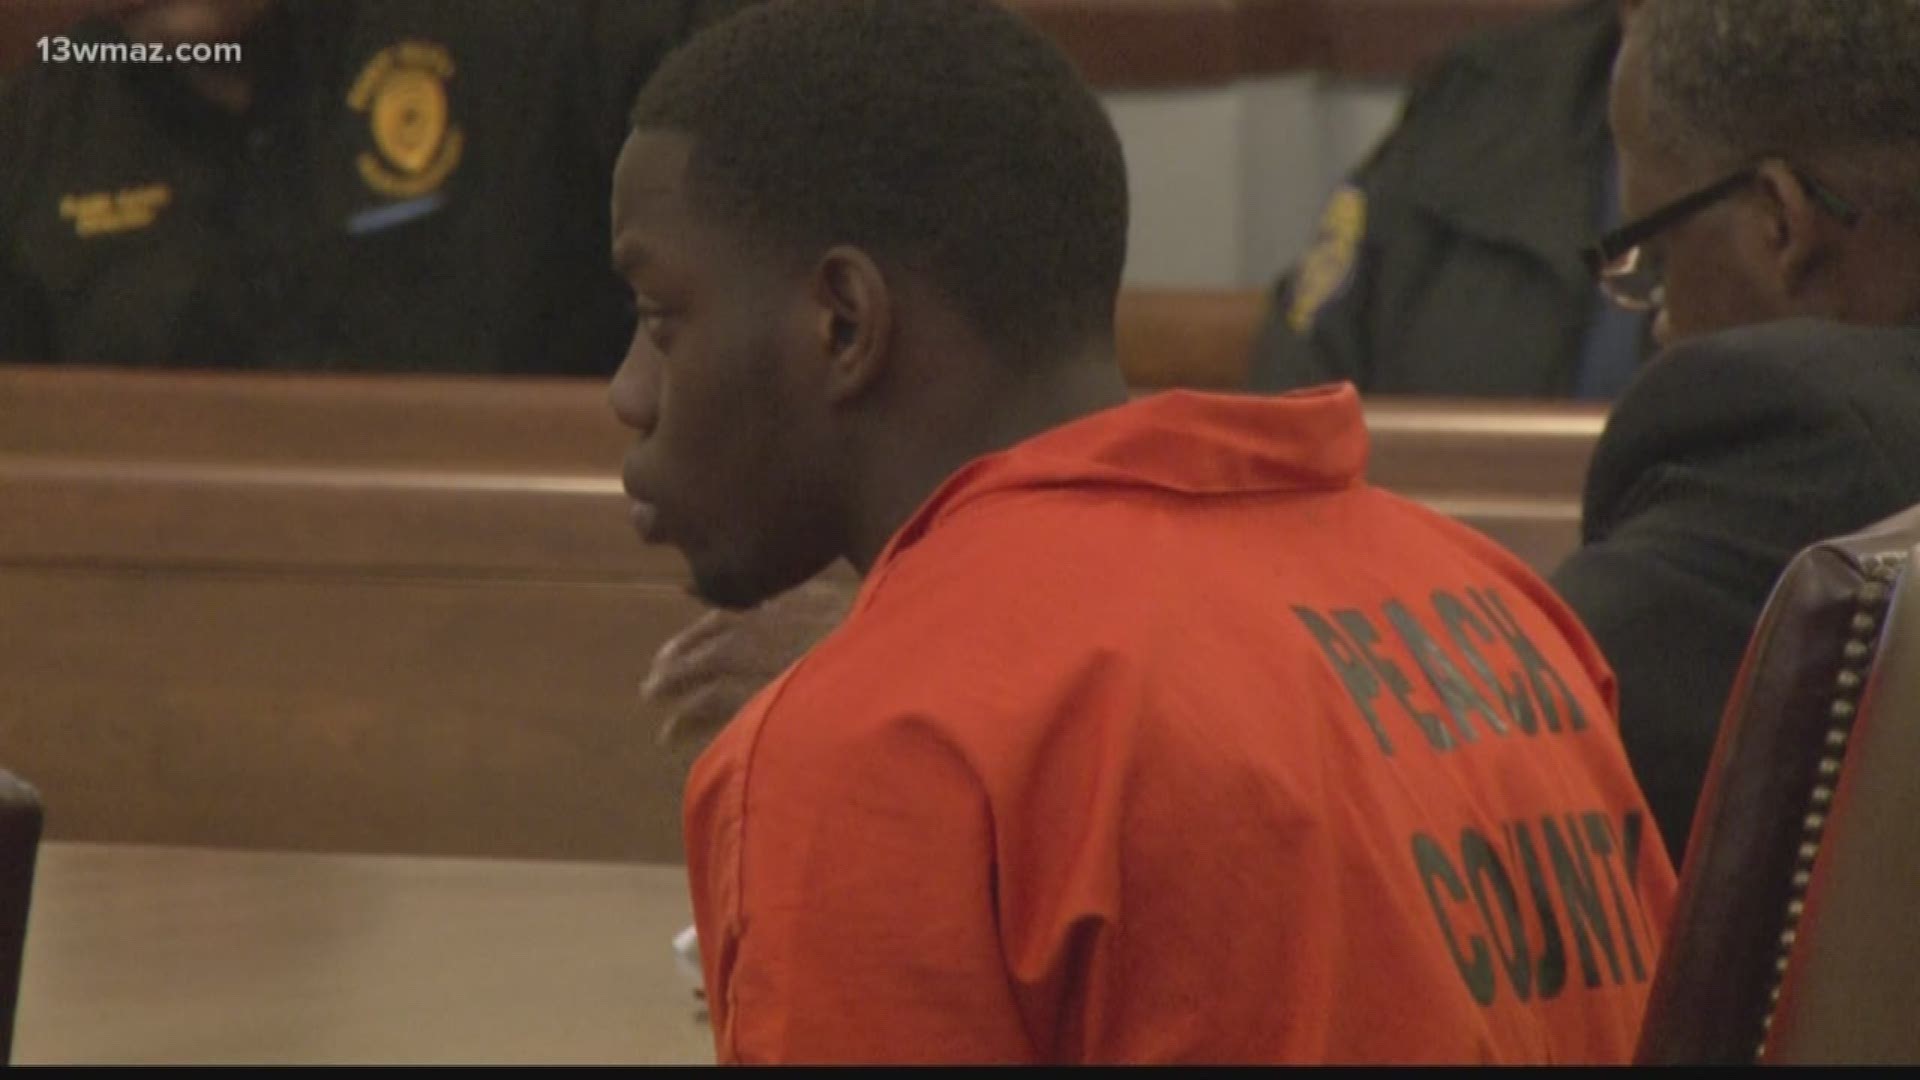 Hours after a bond hearing for Demarcus Little, the man accused of damaging girlfriend Anitra Gunn's property, officials have announced a new charge.